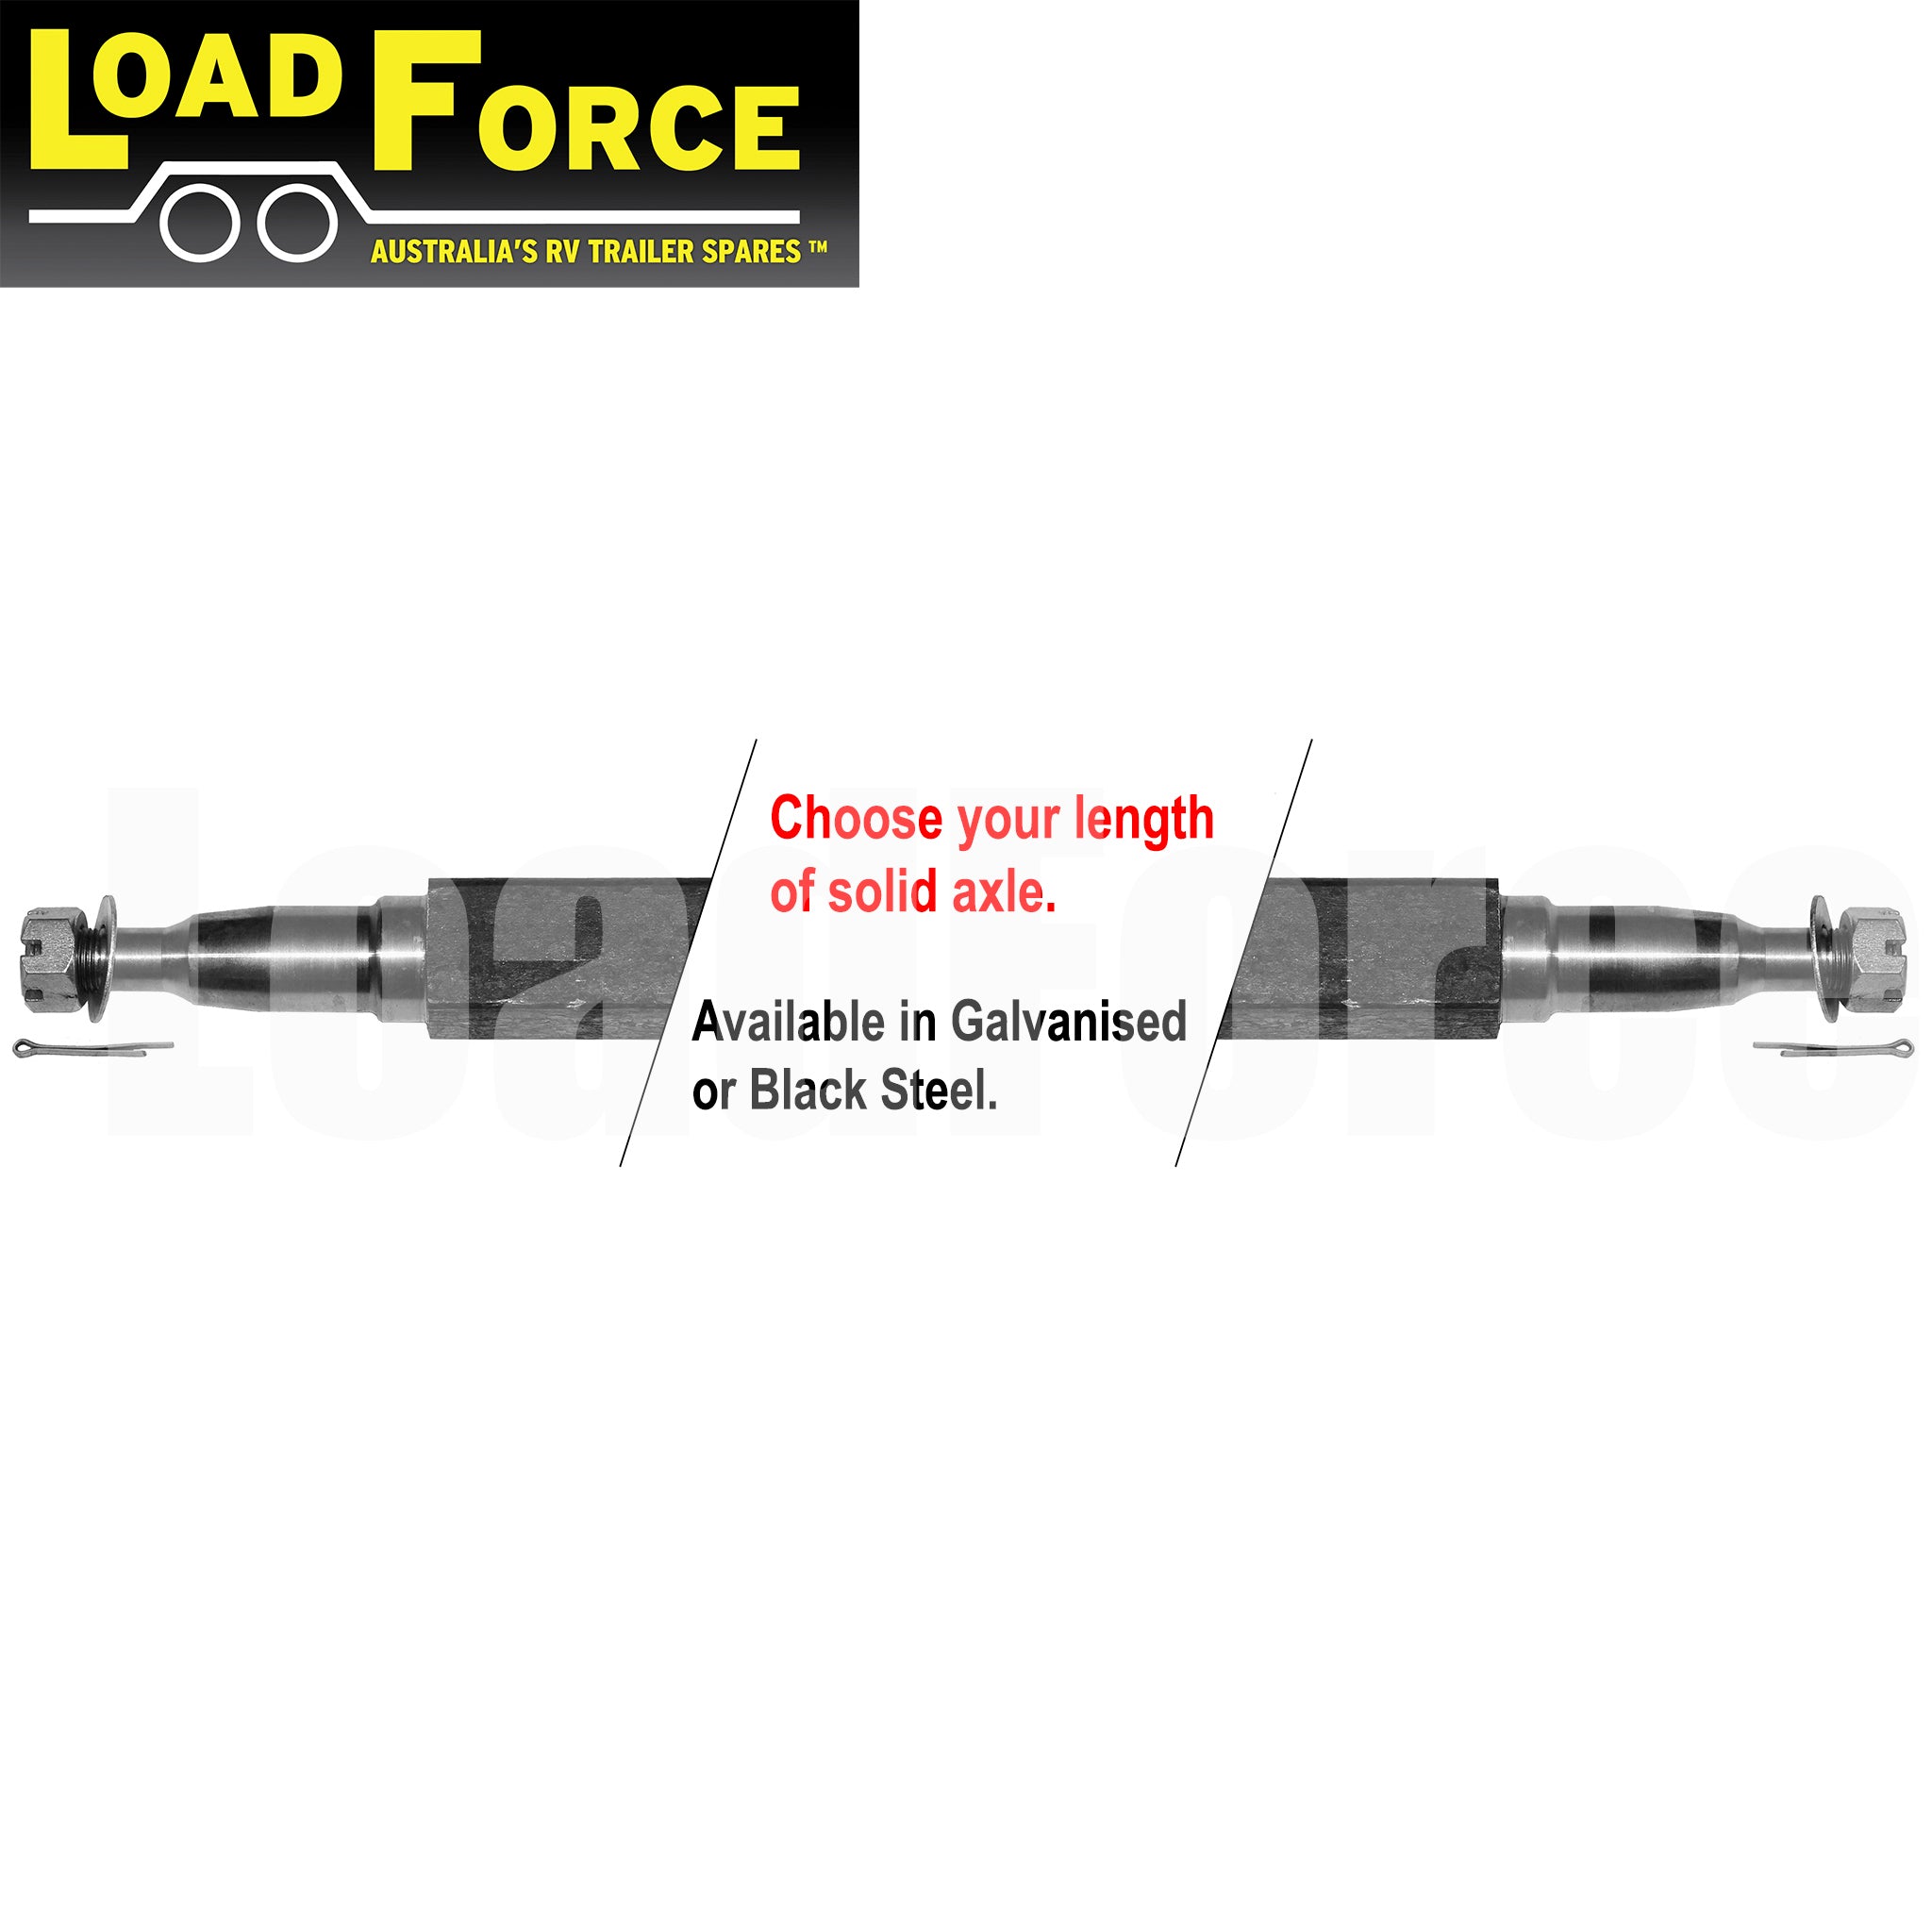 LoadForce Axle 40mm square LM bearing turn 1200kg rating - choose length and finish